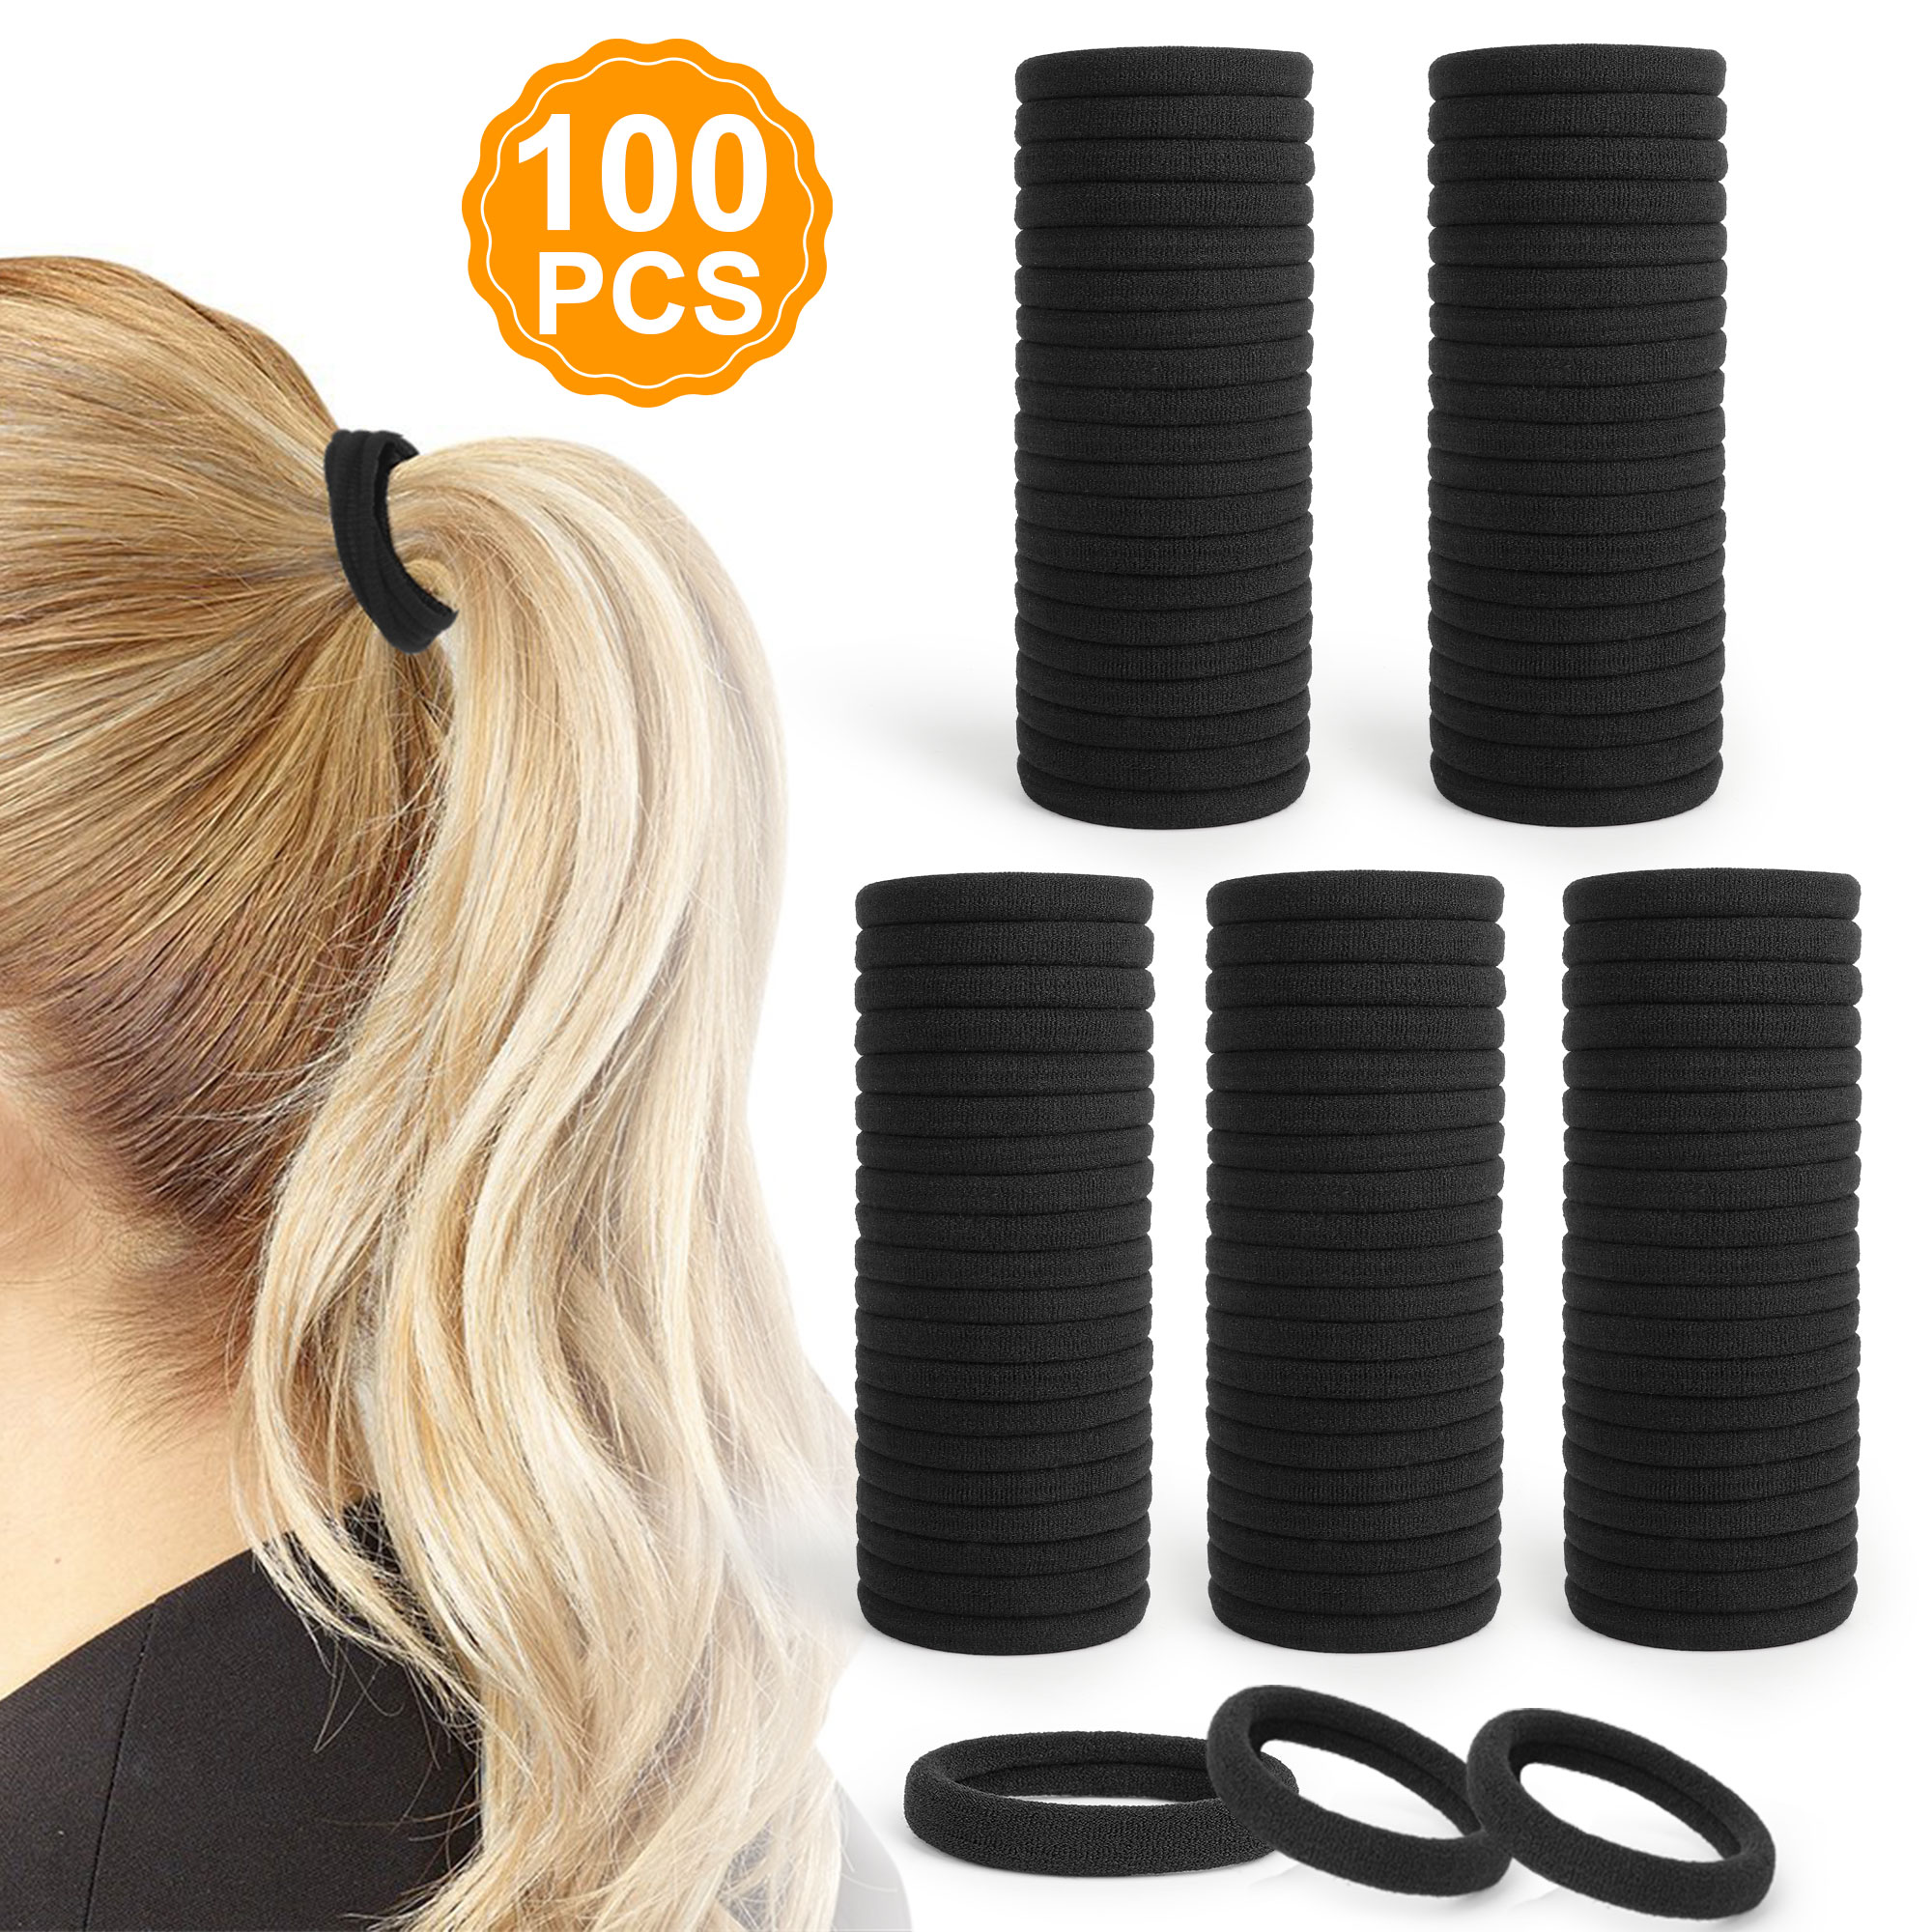 100pcs Black Hair Ties for Women Girls, TSV Seamless Thick Black Hair Bands, Elastic Stretchy Hair Ties, No Damage Ponytail Holder for Thick Heavy and Curly Hair, 1.58inch - image 1 of 9